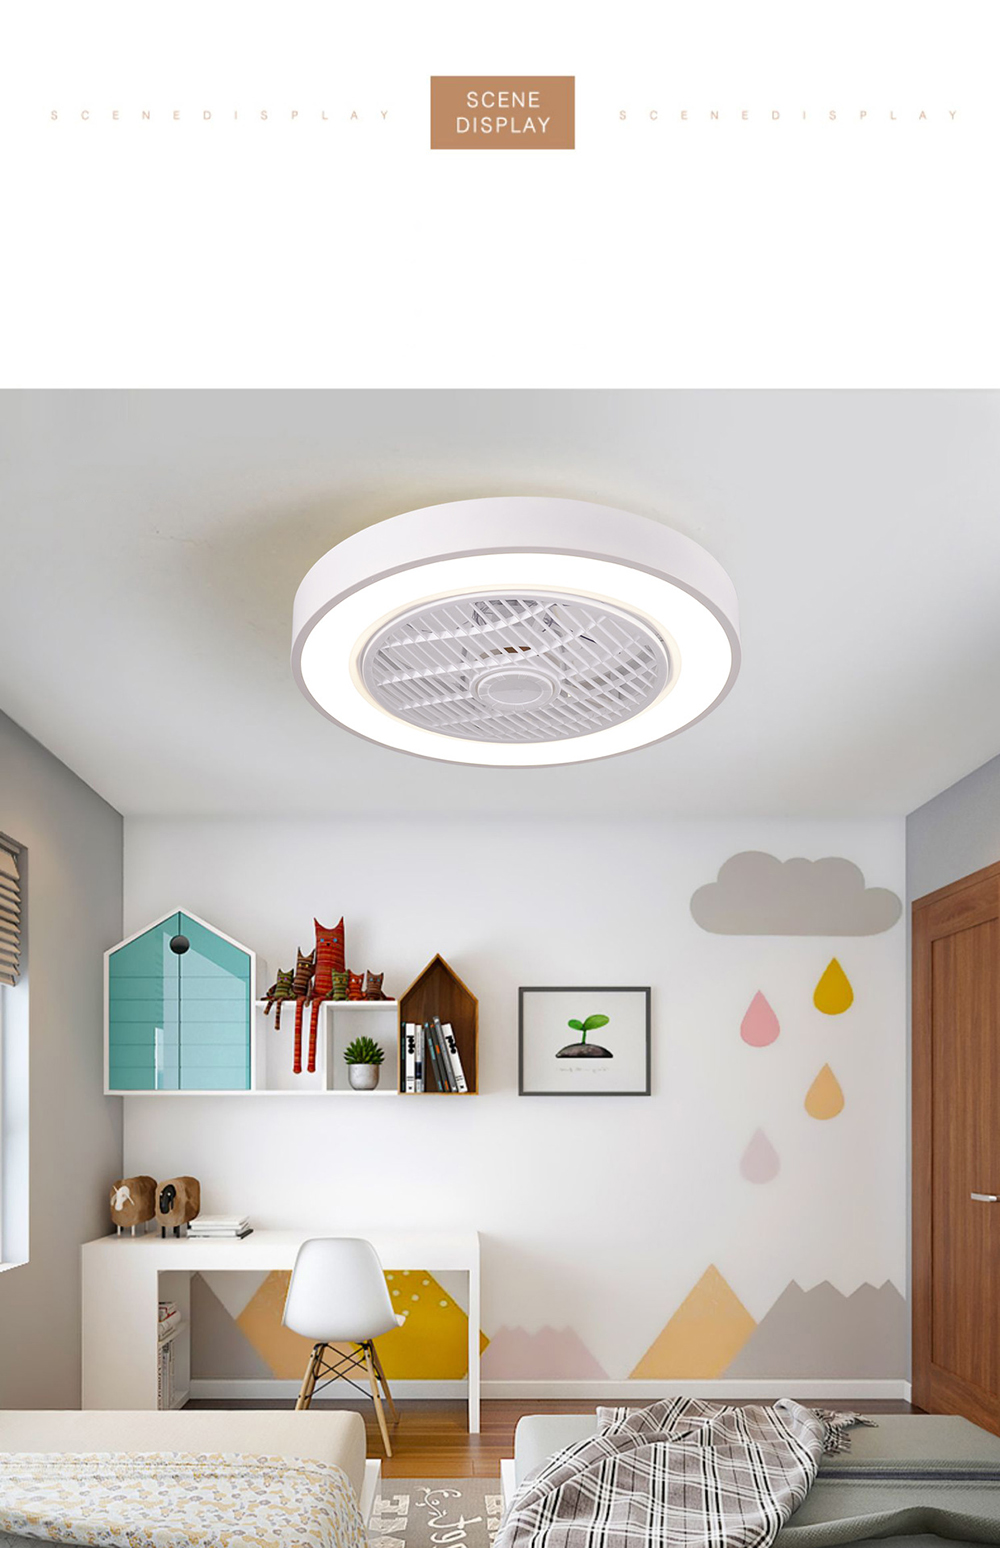 Smart-Ceiling-Fan-with-Remote-Control-Cell-Phone-Wi-Fi-Indoor-Home-Decor-Ceiling-Fan-with-Light-Mode-1680467-1